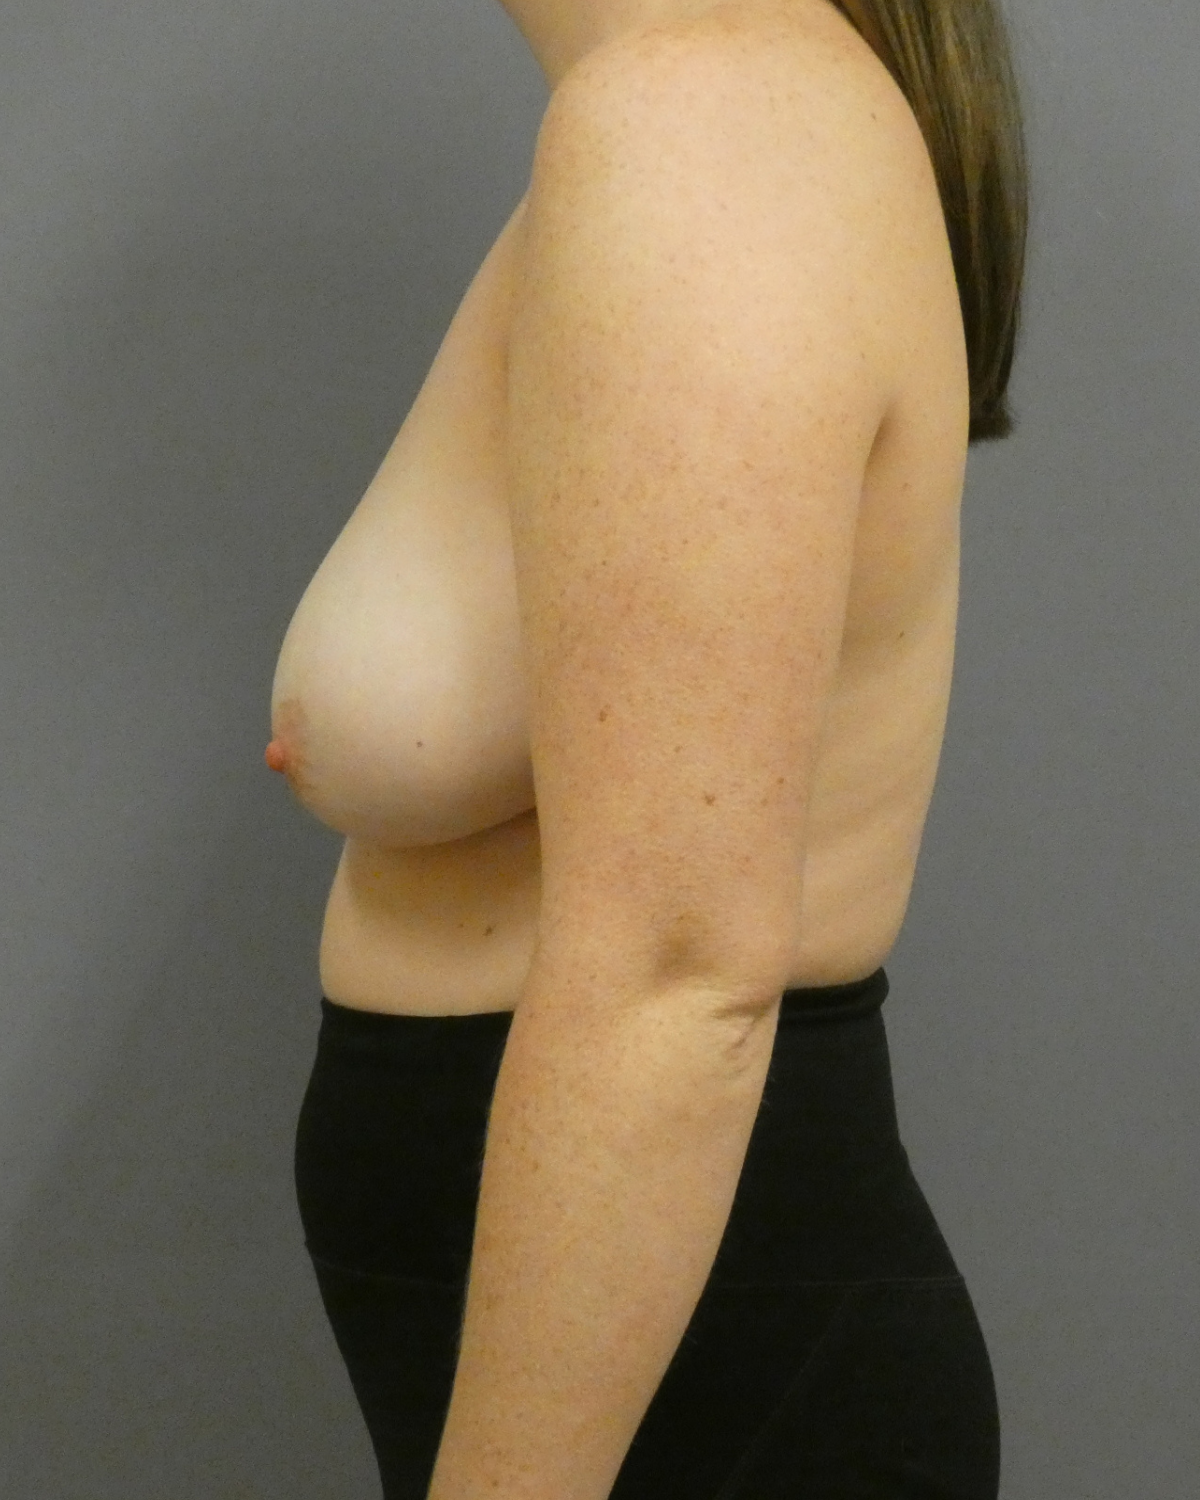 Breast Reduction Gallery Before Patient 1